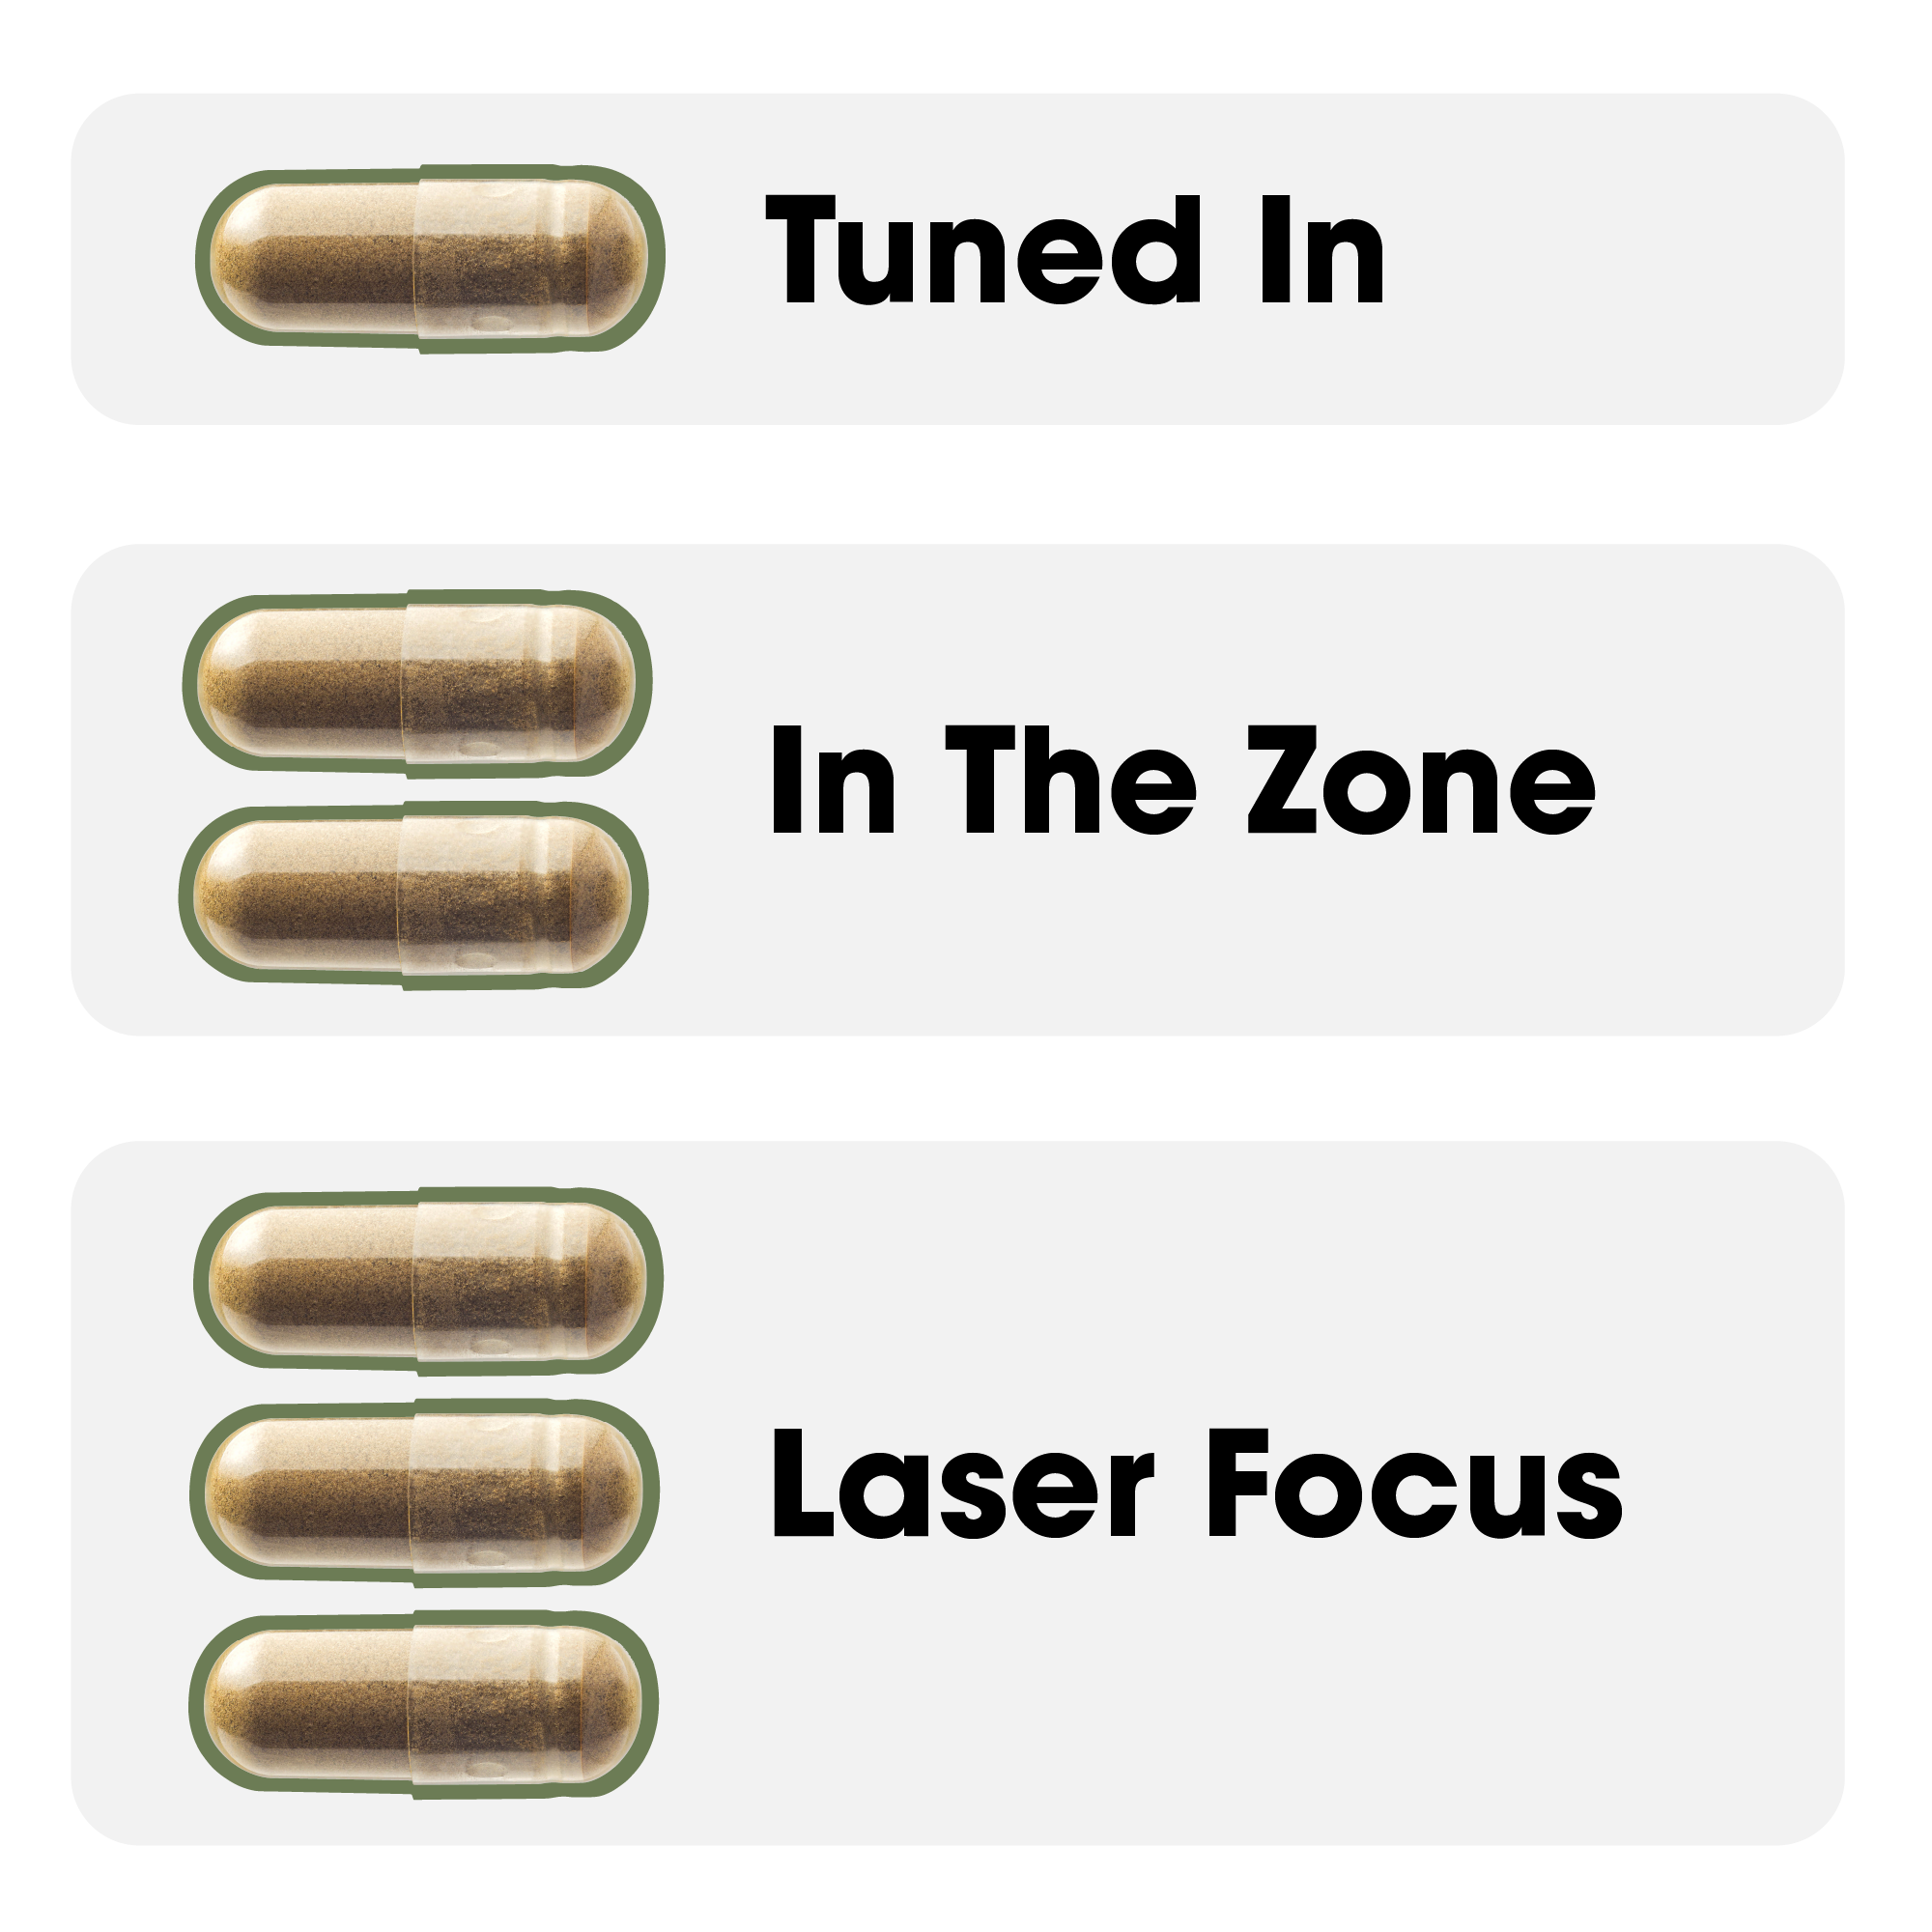 Dosages: 1 capsule makes you Tuned In, two capsules puts you ’In The Zone’, three capsules create Laser Focus.